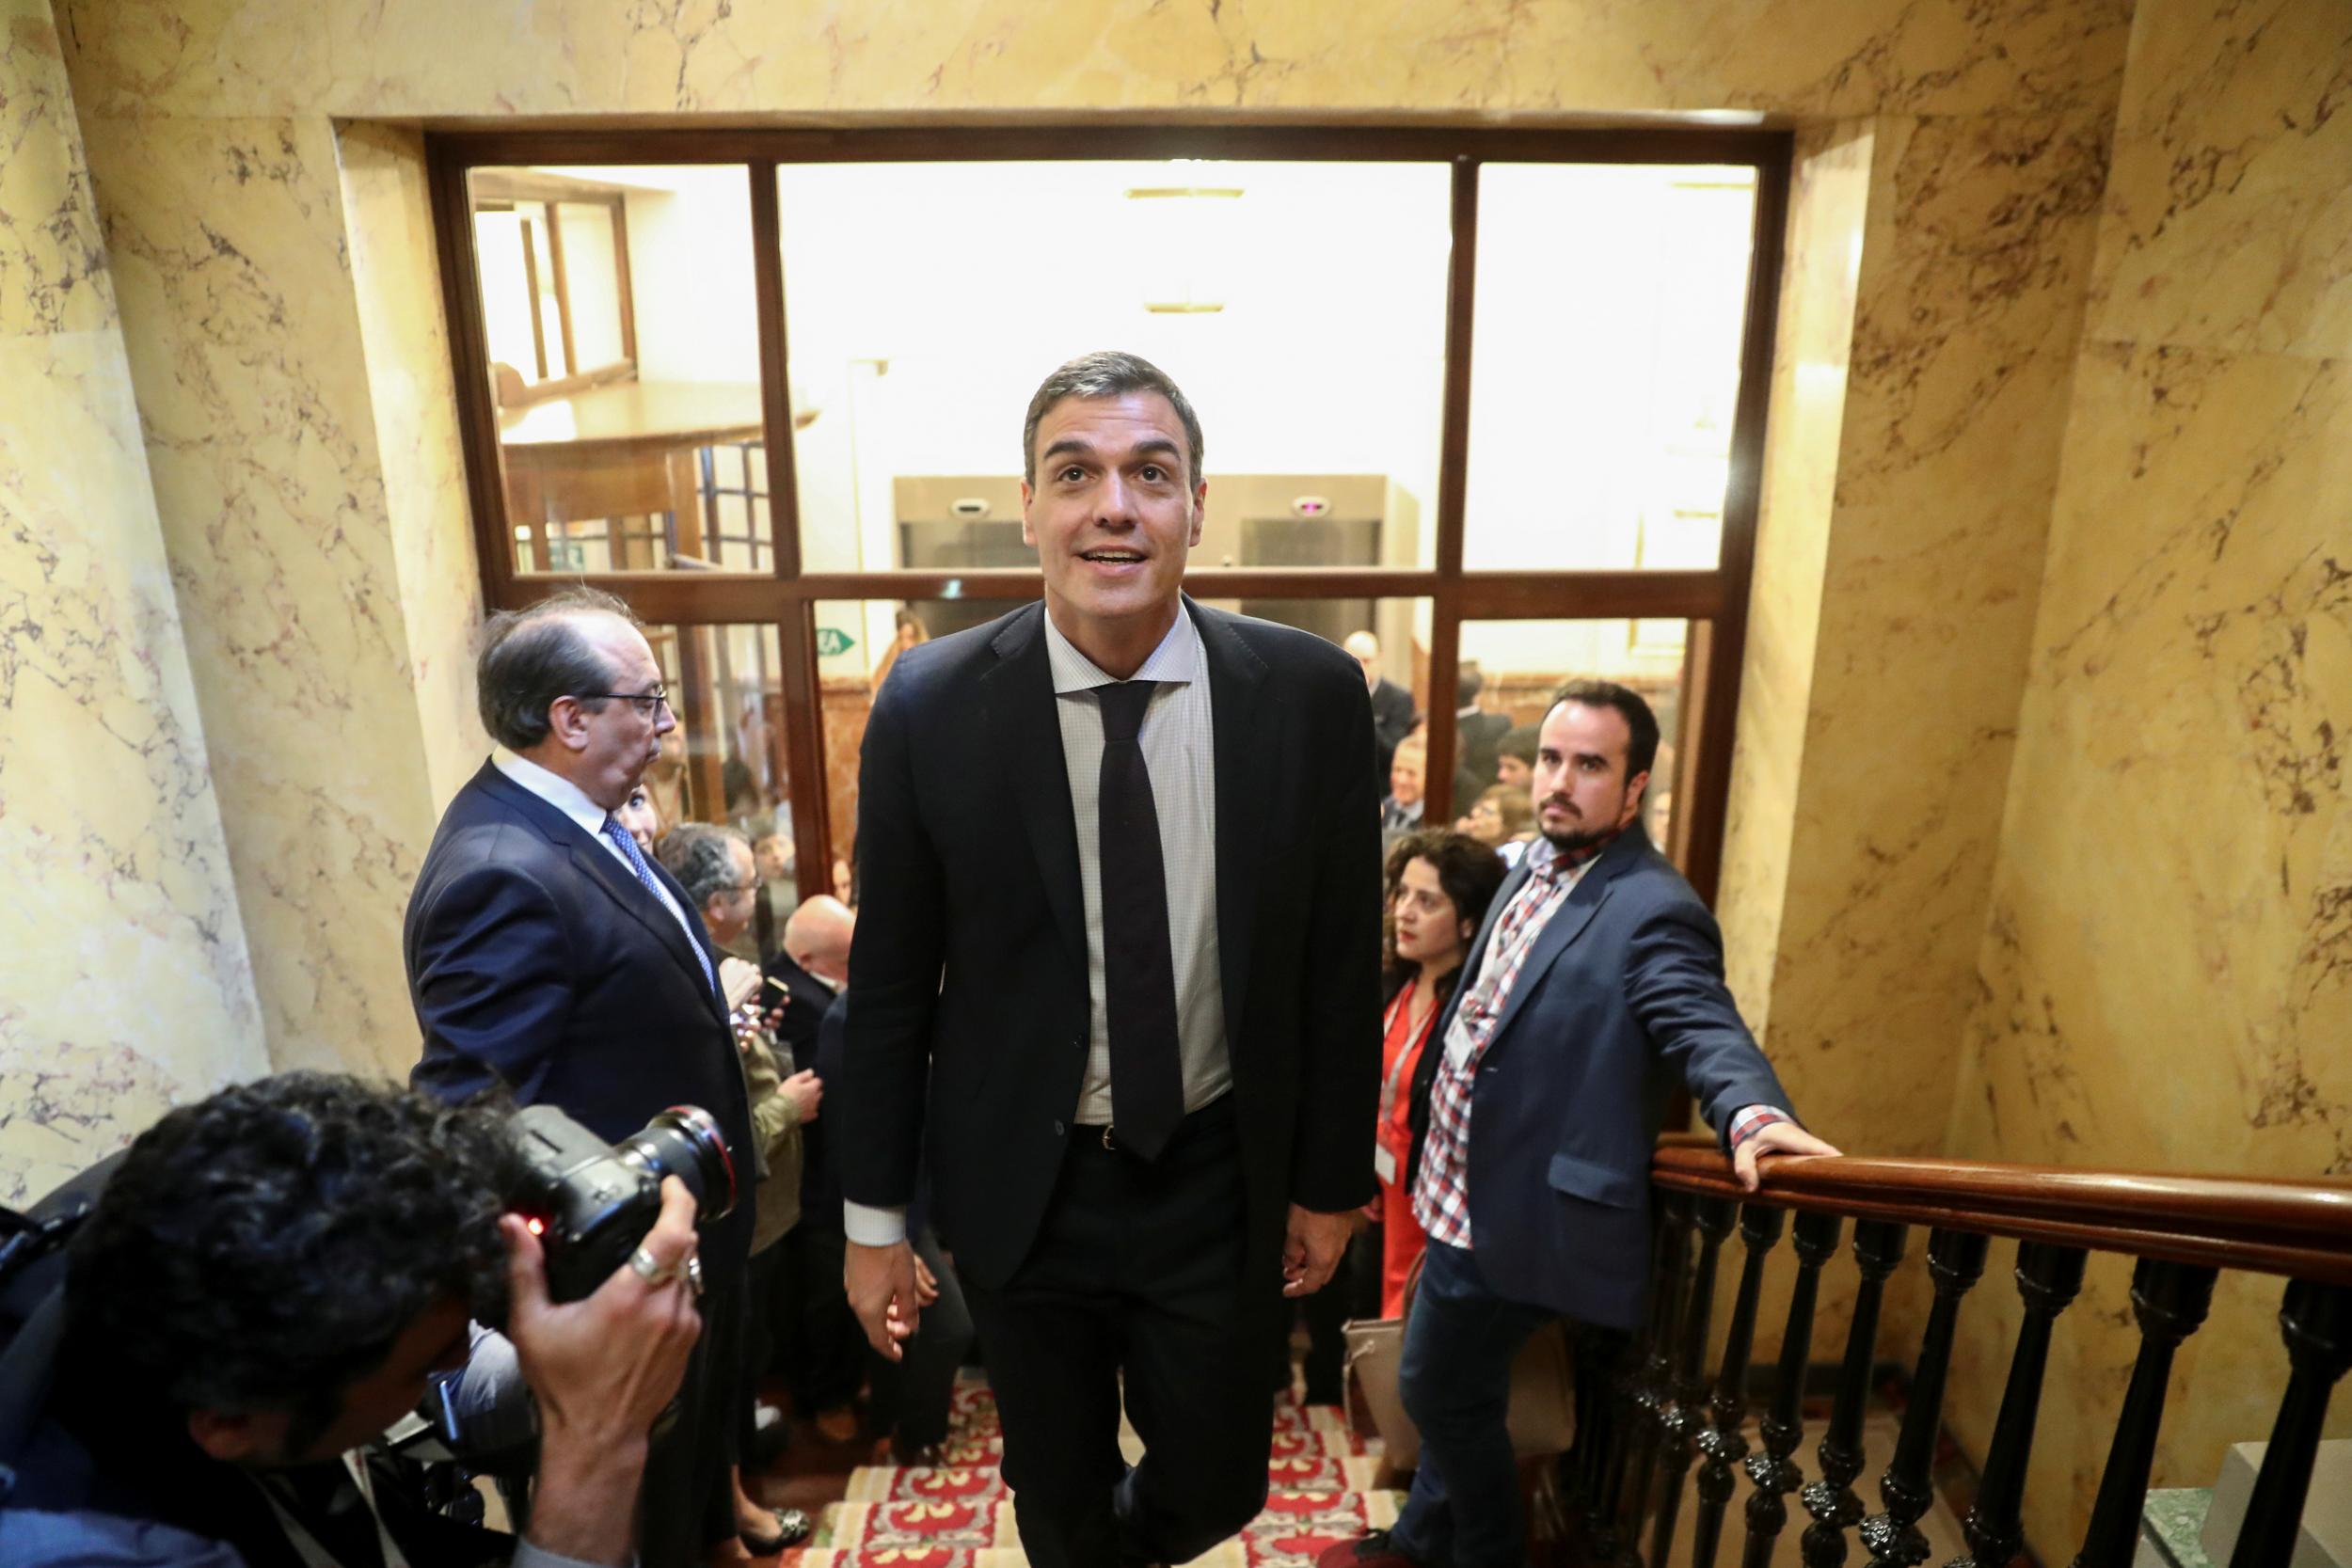 Spain’s new prime minister and Socialist party leader Pedro Sanchez leaves the chamber after a motion of no-confidence vote at parliament in Madrid on 1 June 2018 (Sergio Perez/Reuters)